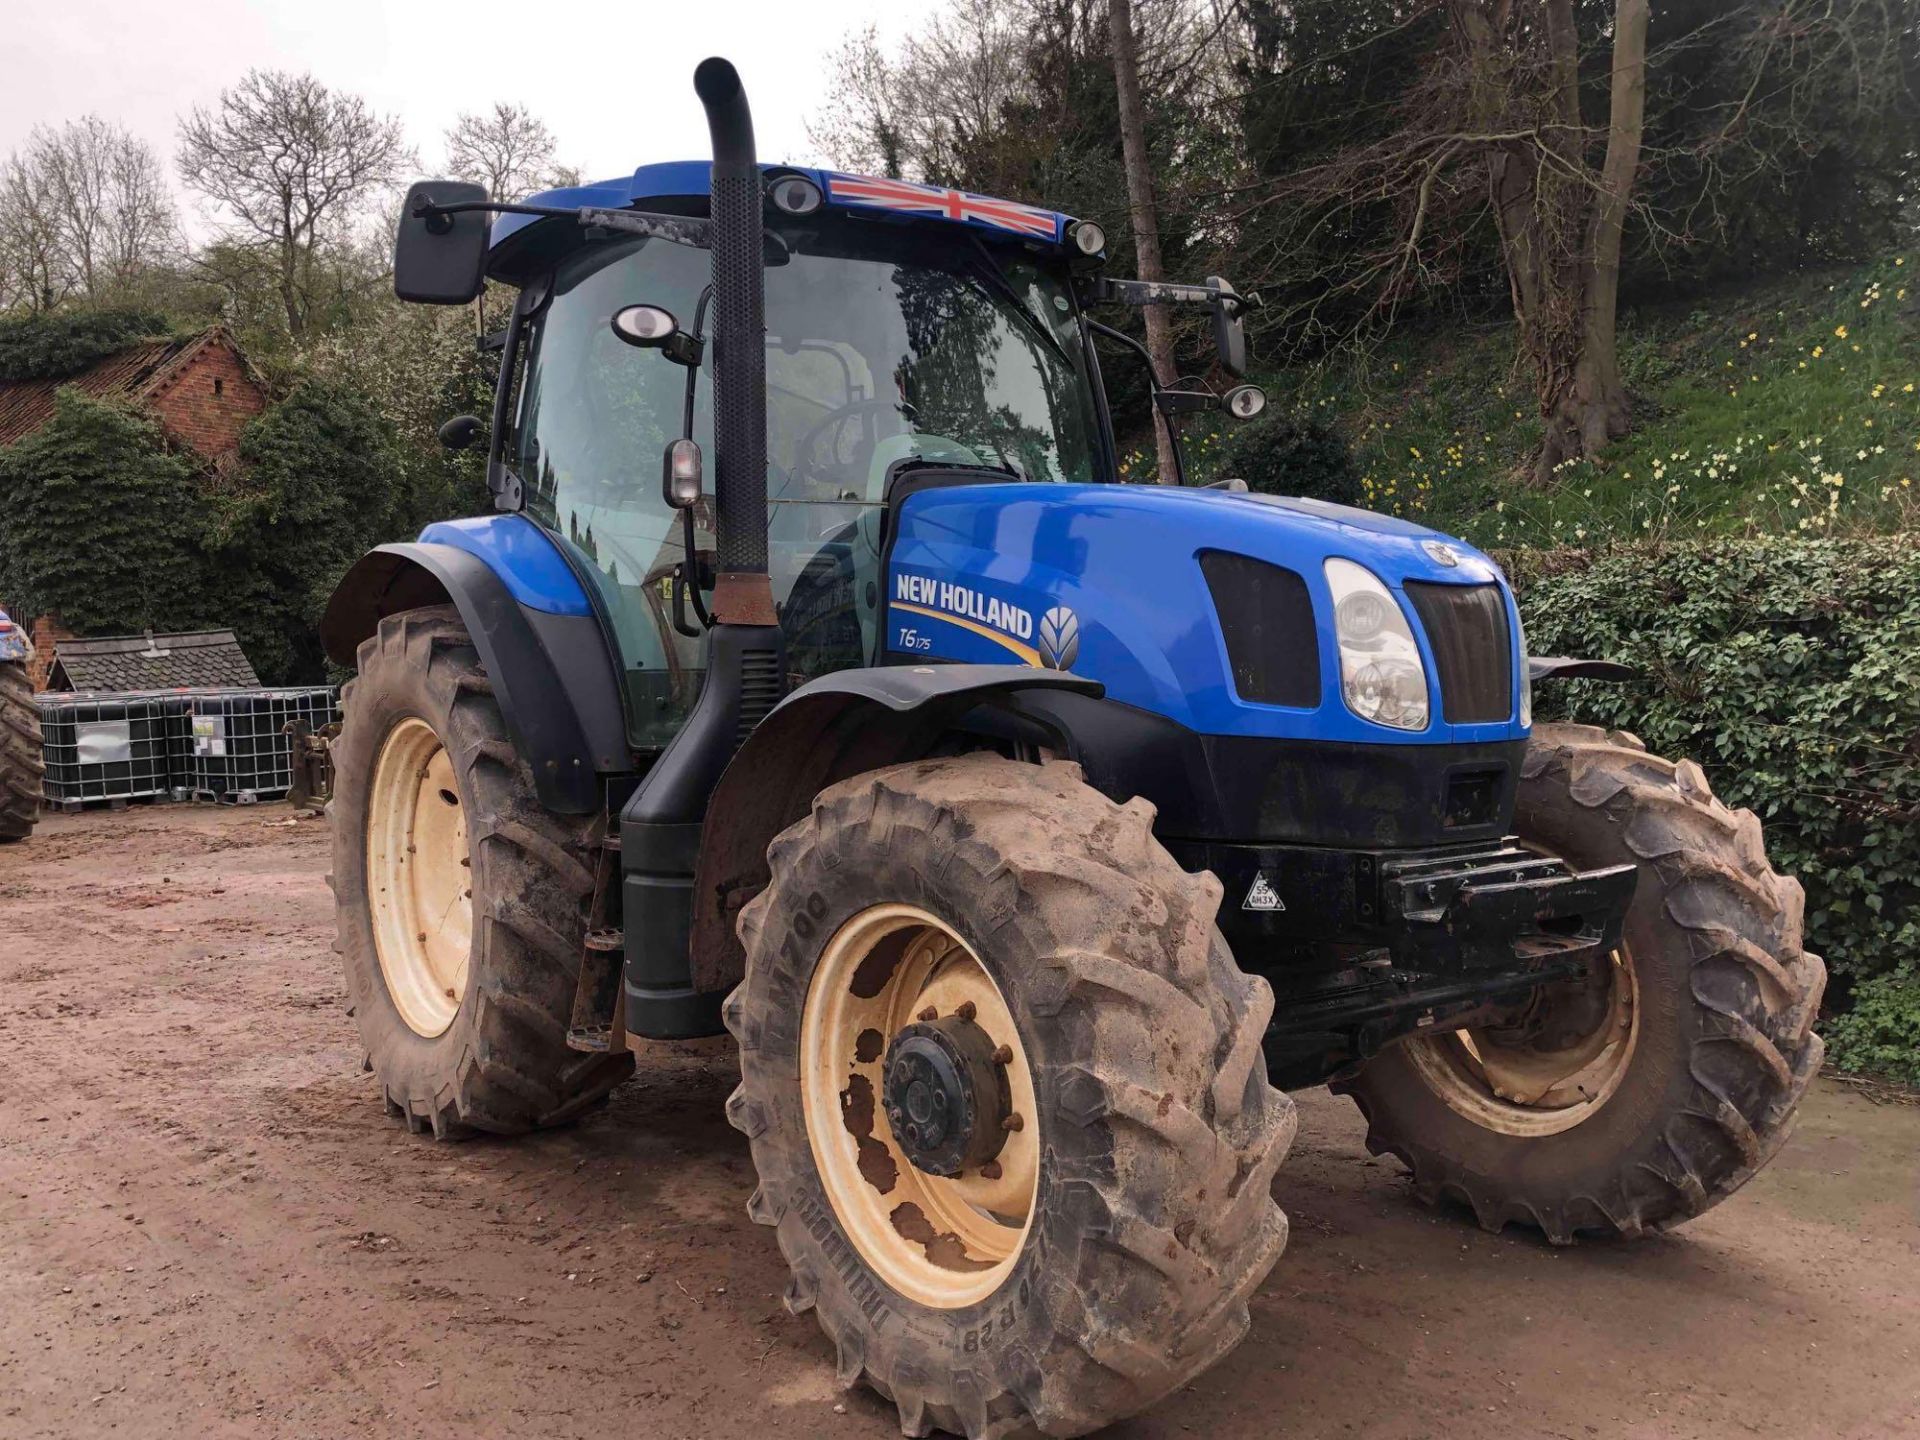 2013 New Holland T6.175 4wd tractor, 3 manual spools, air, on 420/70R28 front and 520/70R38 rear whe - Bild 6 aus 26